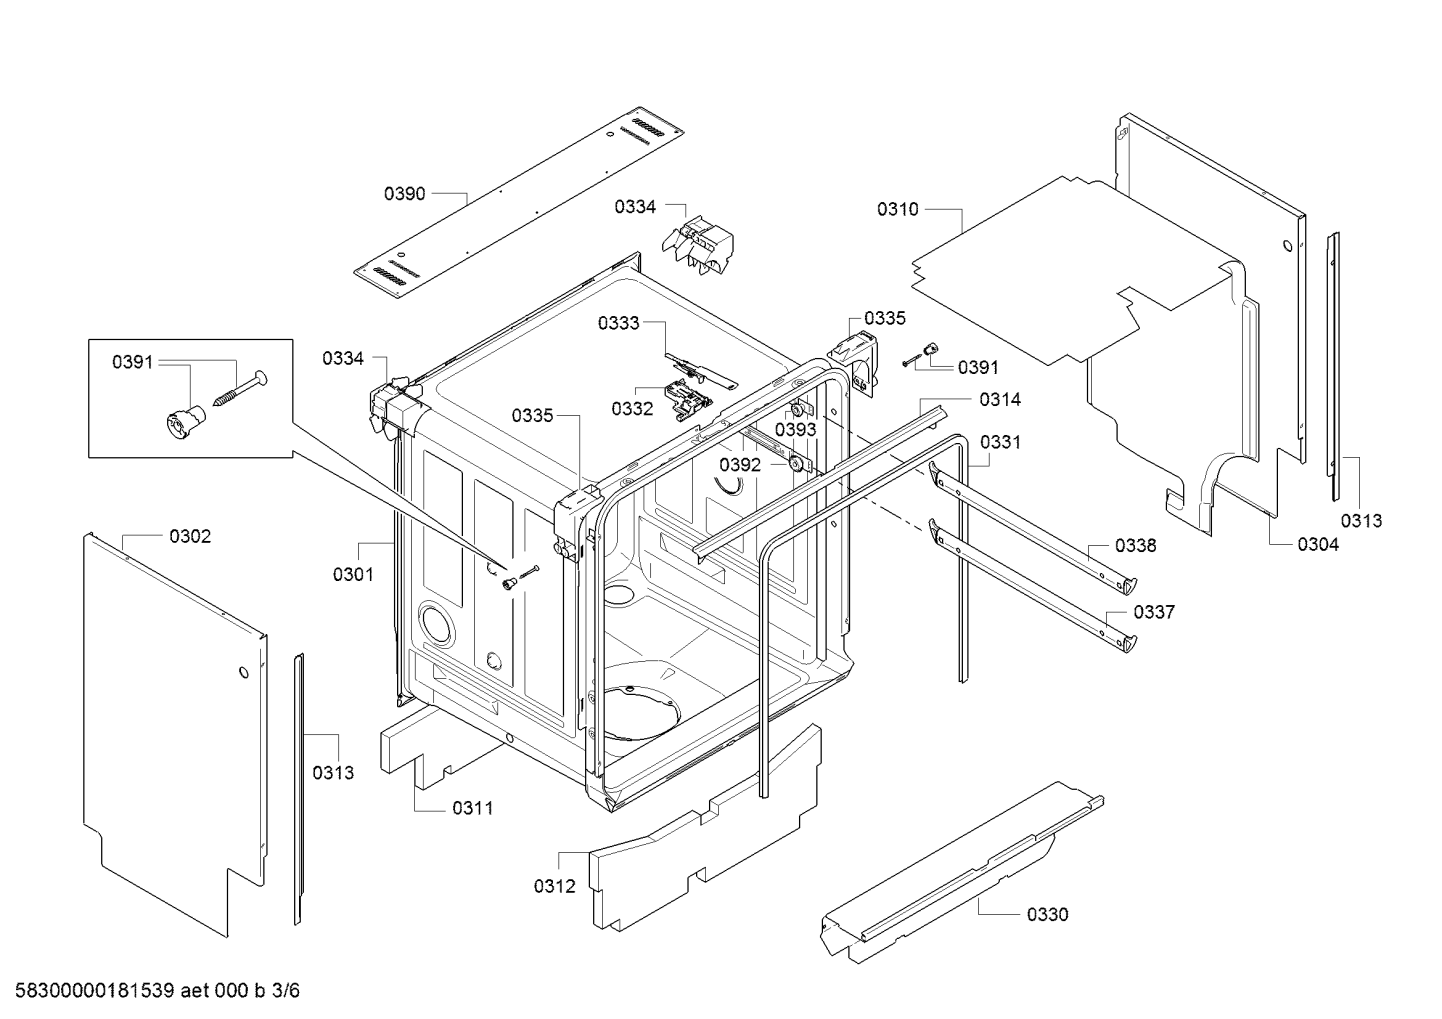 drawing_link_3_device_1651915